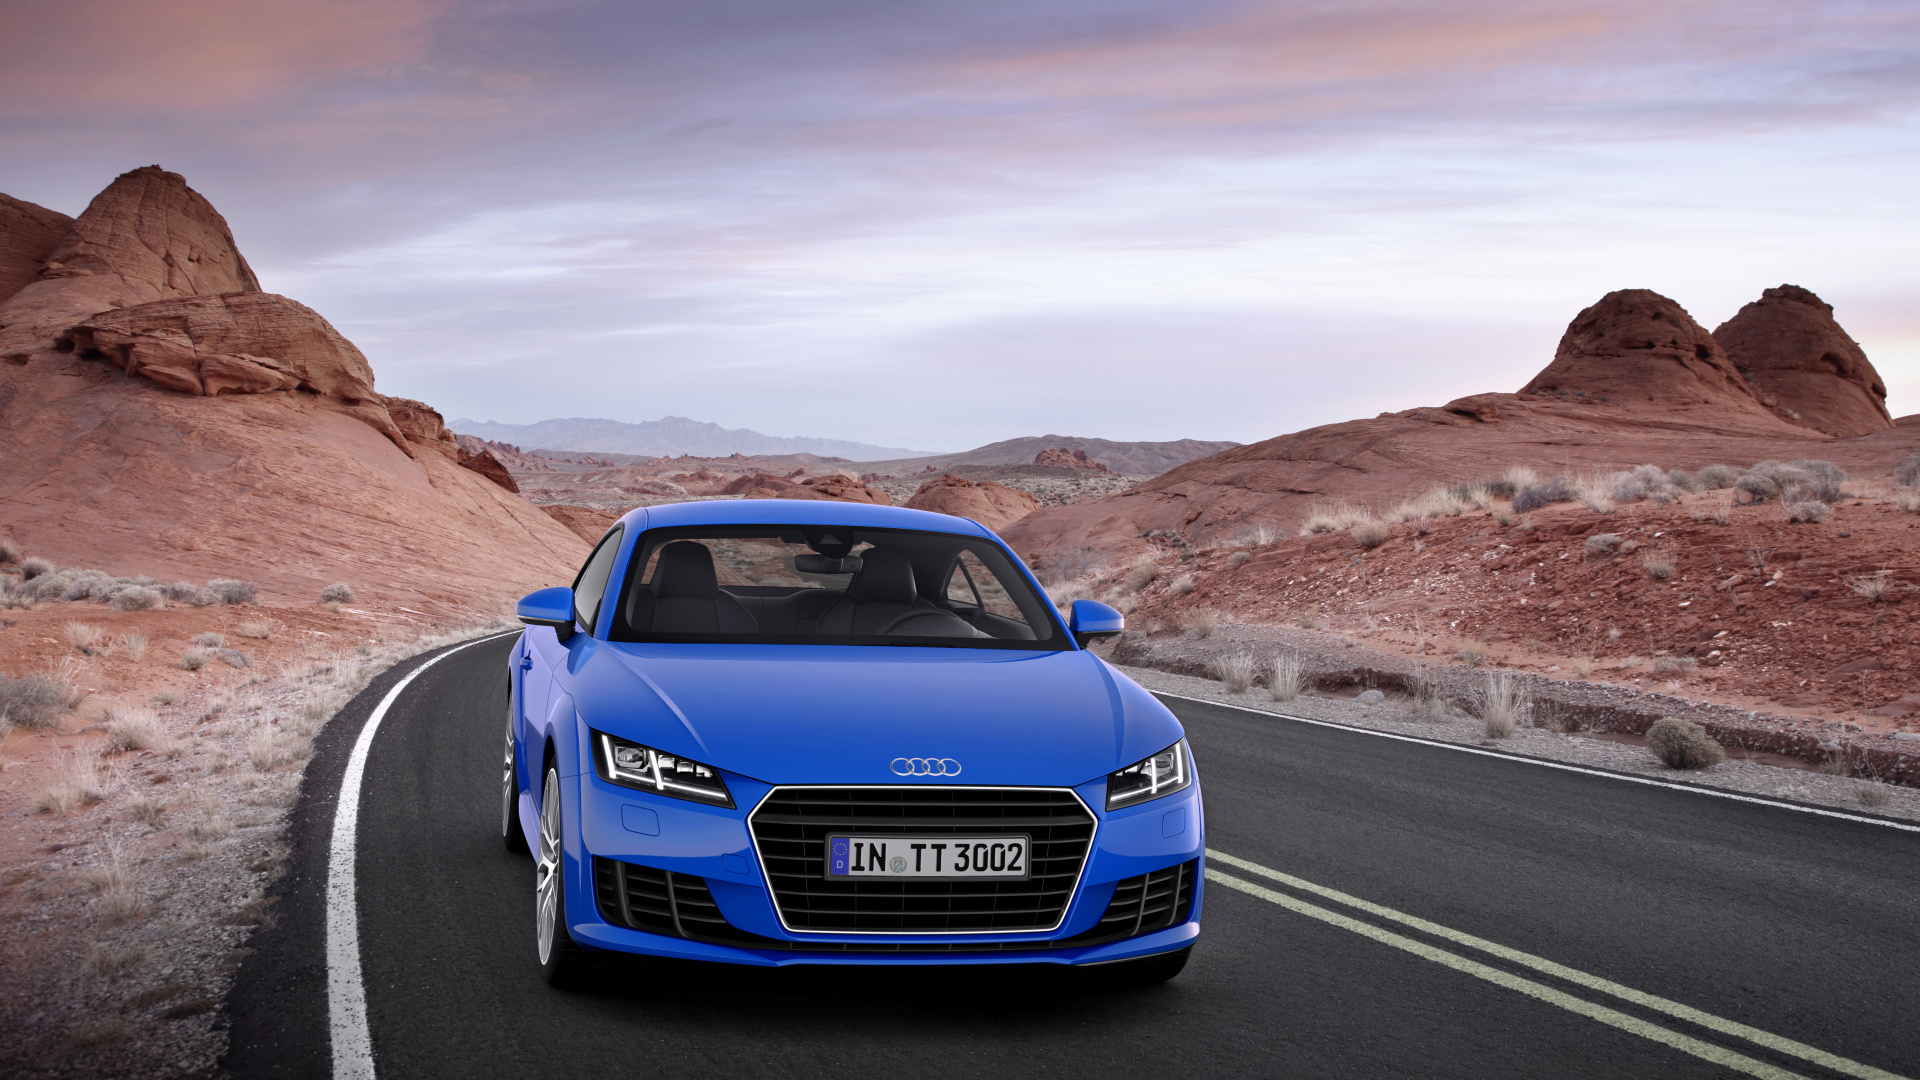 Blue Audi a 4 on Road During Daytime. Wallpaper in 1920x1080 Resolution